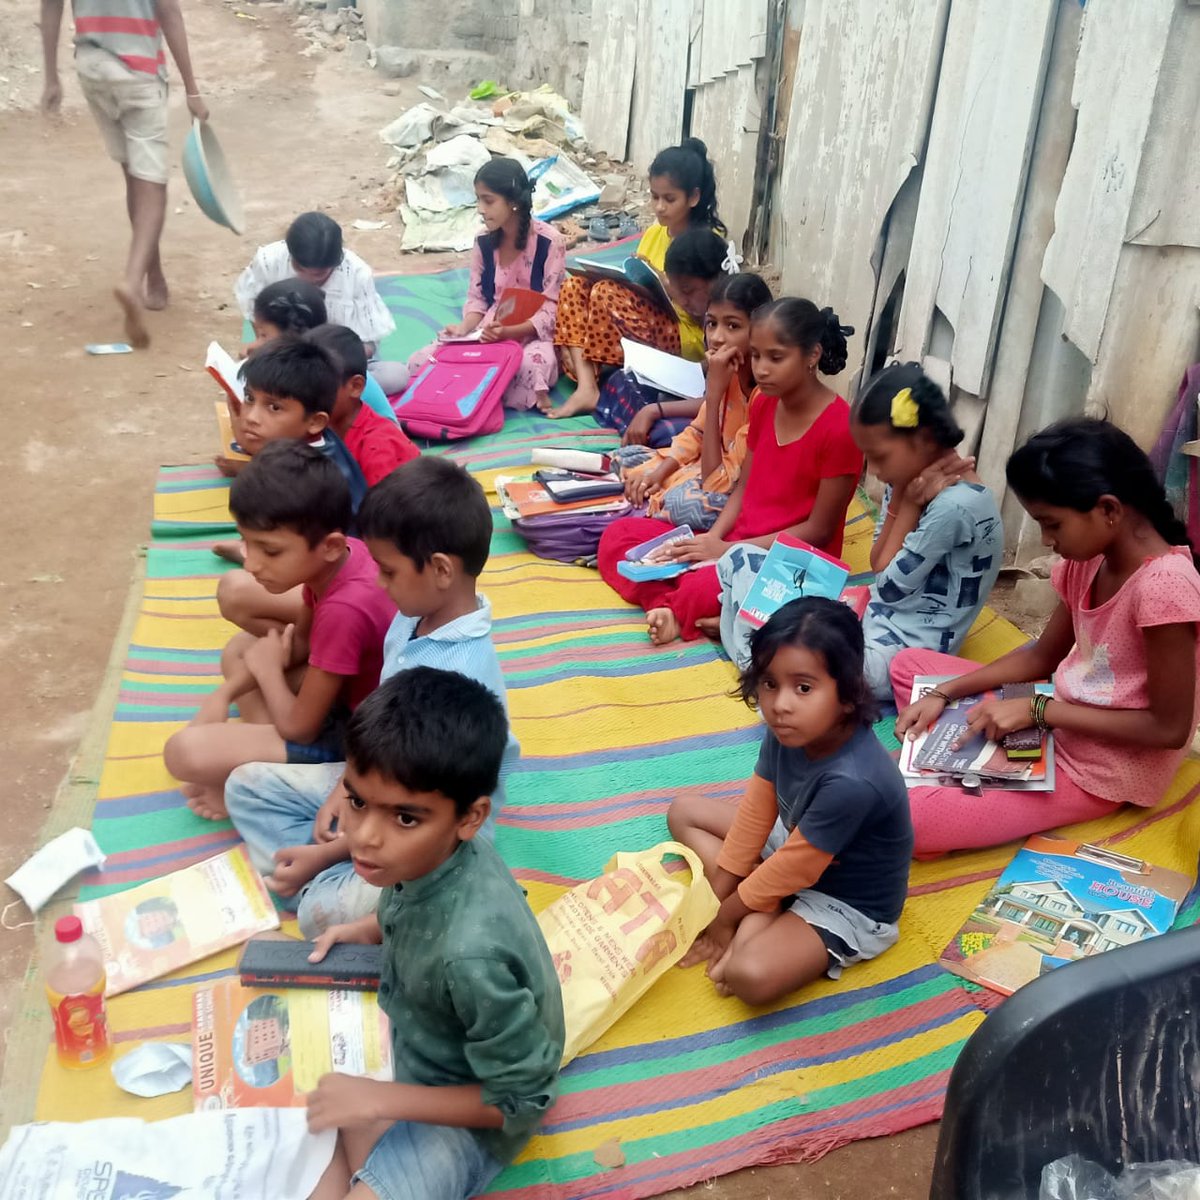 Urgent support! we have been running learning  centers in  Singareni slum as  Dalit Women's Collective with focus on creating safe spaces for marginalised girls. We have around 200 kids with 8 teachers.We need teaching aids,books Mats and waterproof tents. DM me for more details.